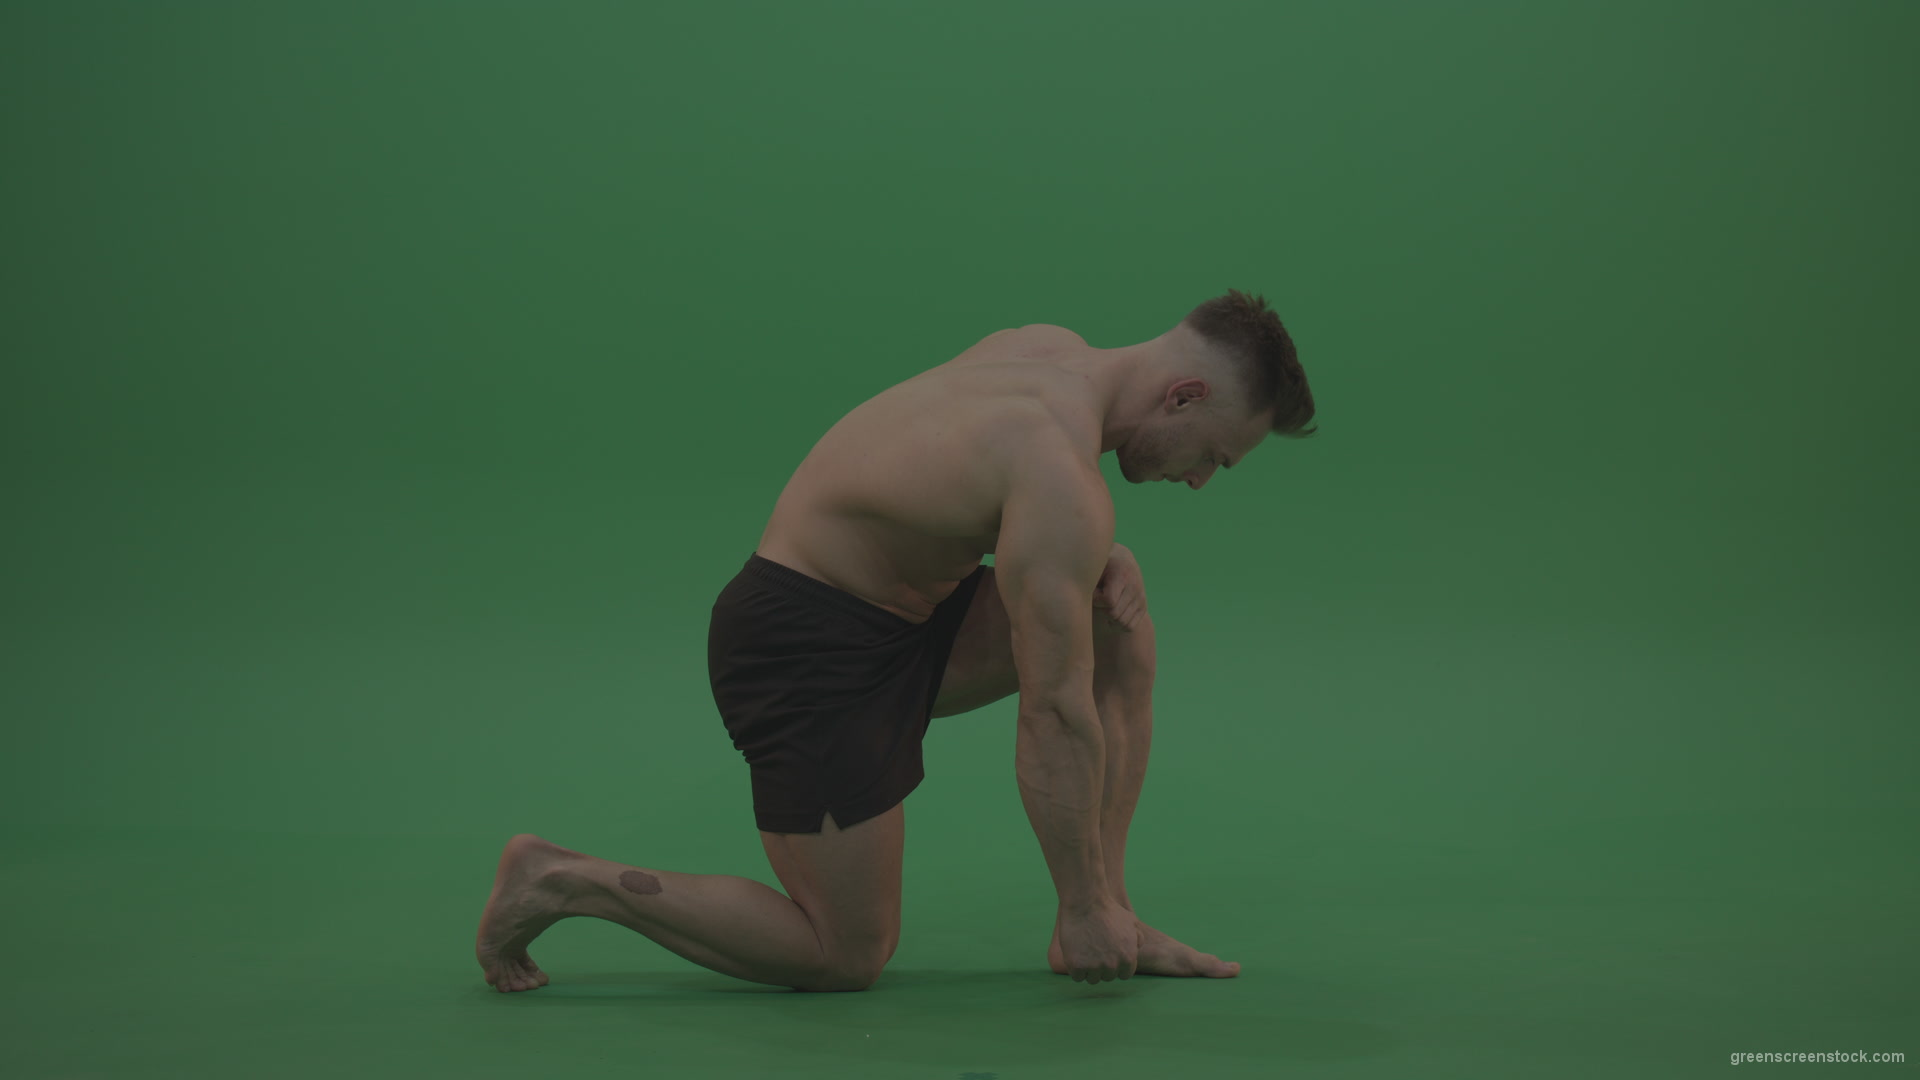 Young_Bodybuilder_Starts_Working_Out_From_Crouching_Terminator_Position_Does_Pull_Ups_Turns_Back_To_The_Start_Position_On_Green_Screen_Wall_Background_009 Green Screen Stock